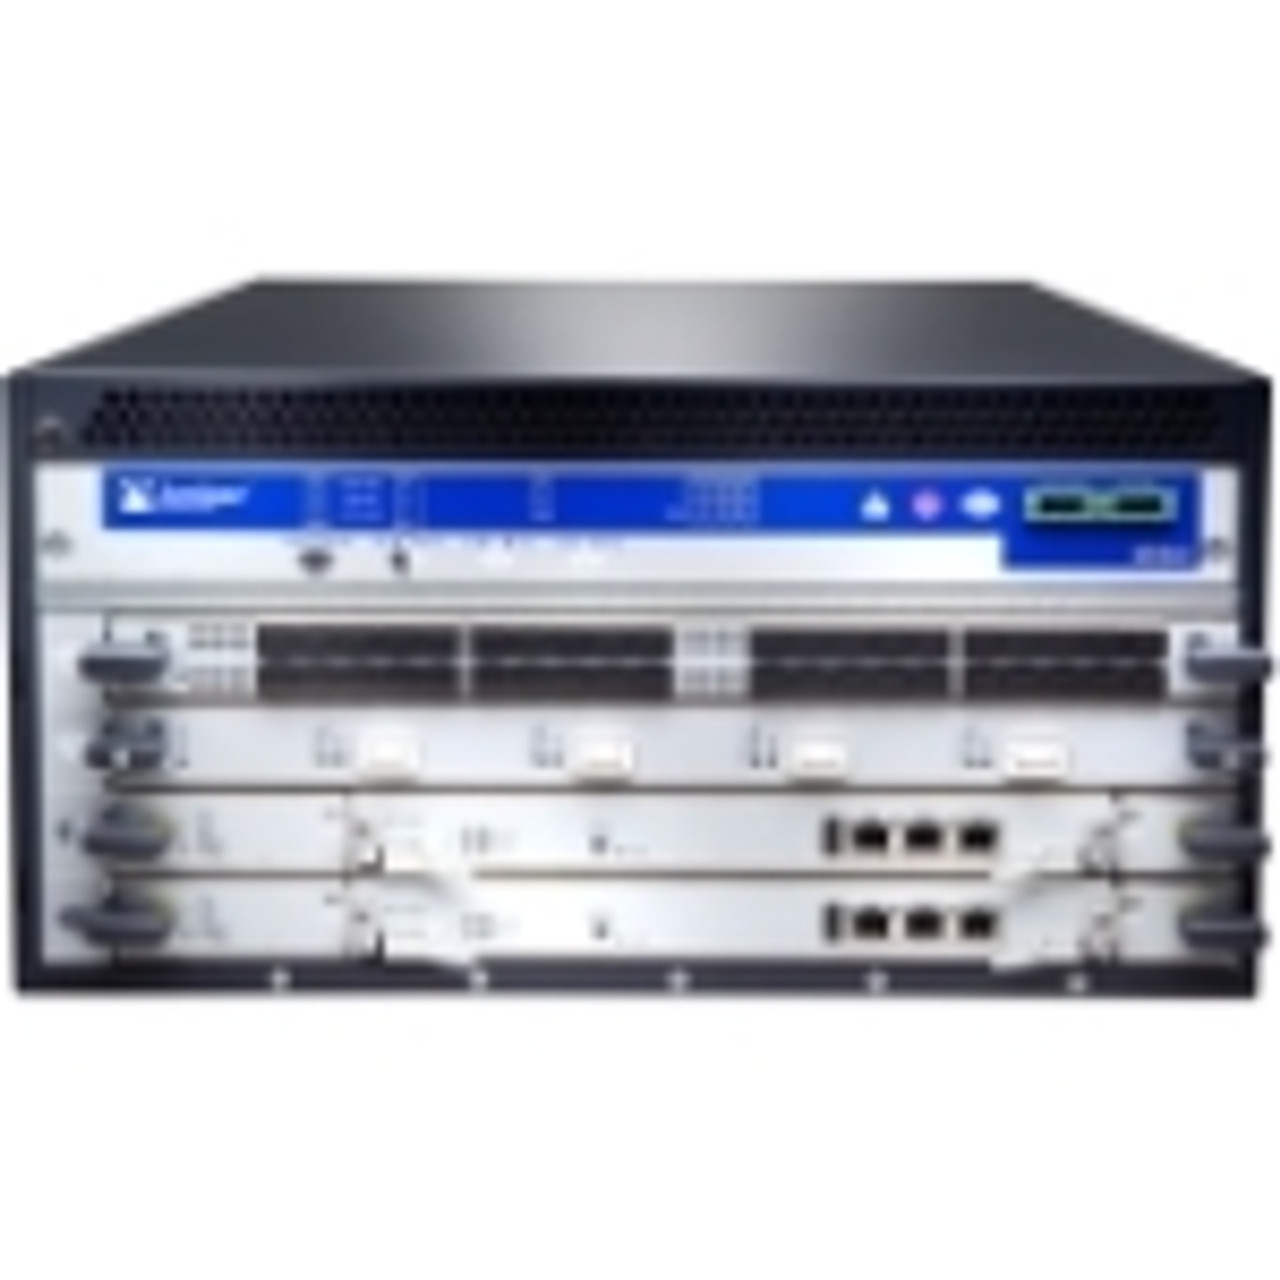 MX240-AC-SVCMPC-B Juniper MX240 Router Chassis 4 Slots 5U Rack-mountable (Refurbished)